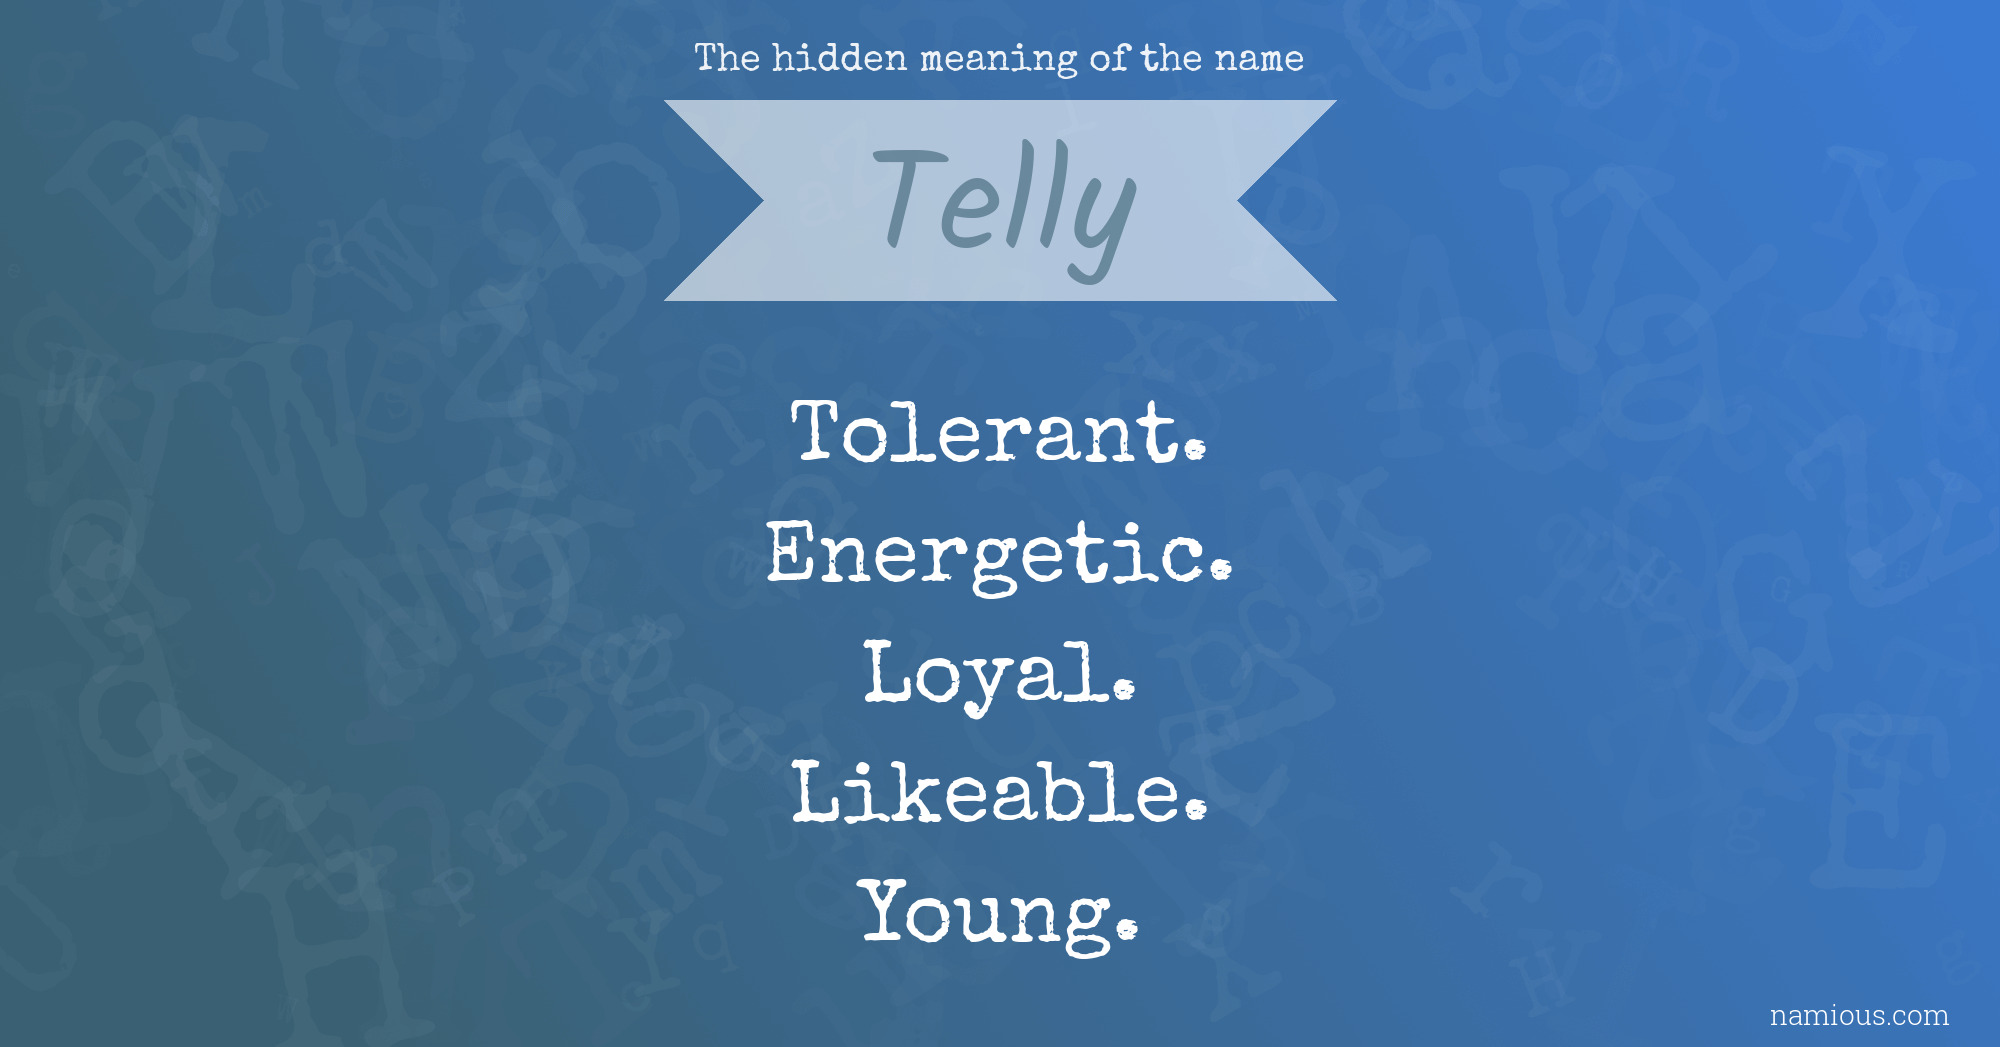 Telly meaning